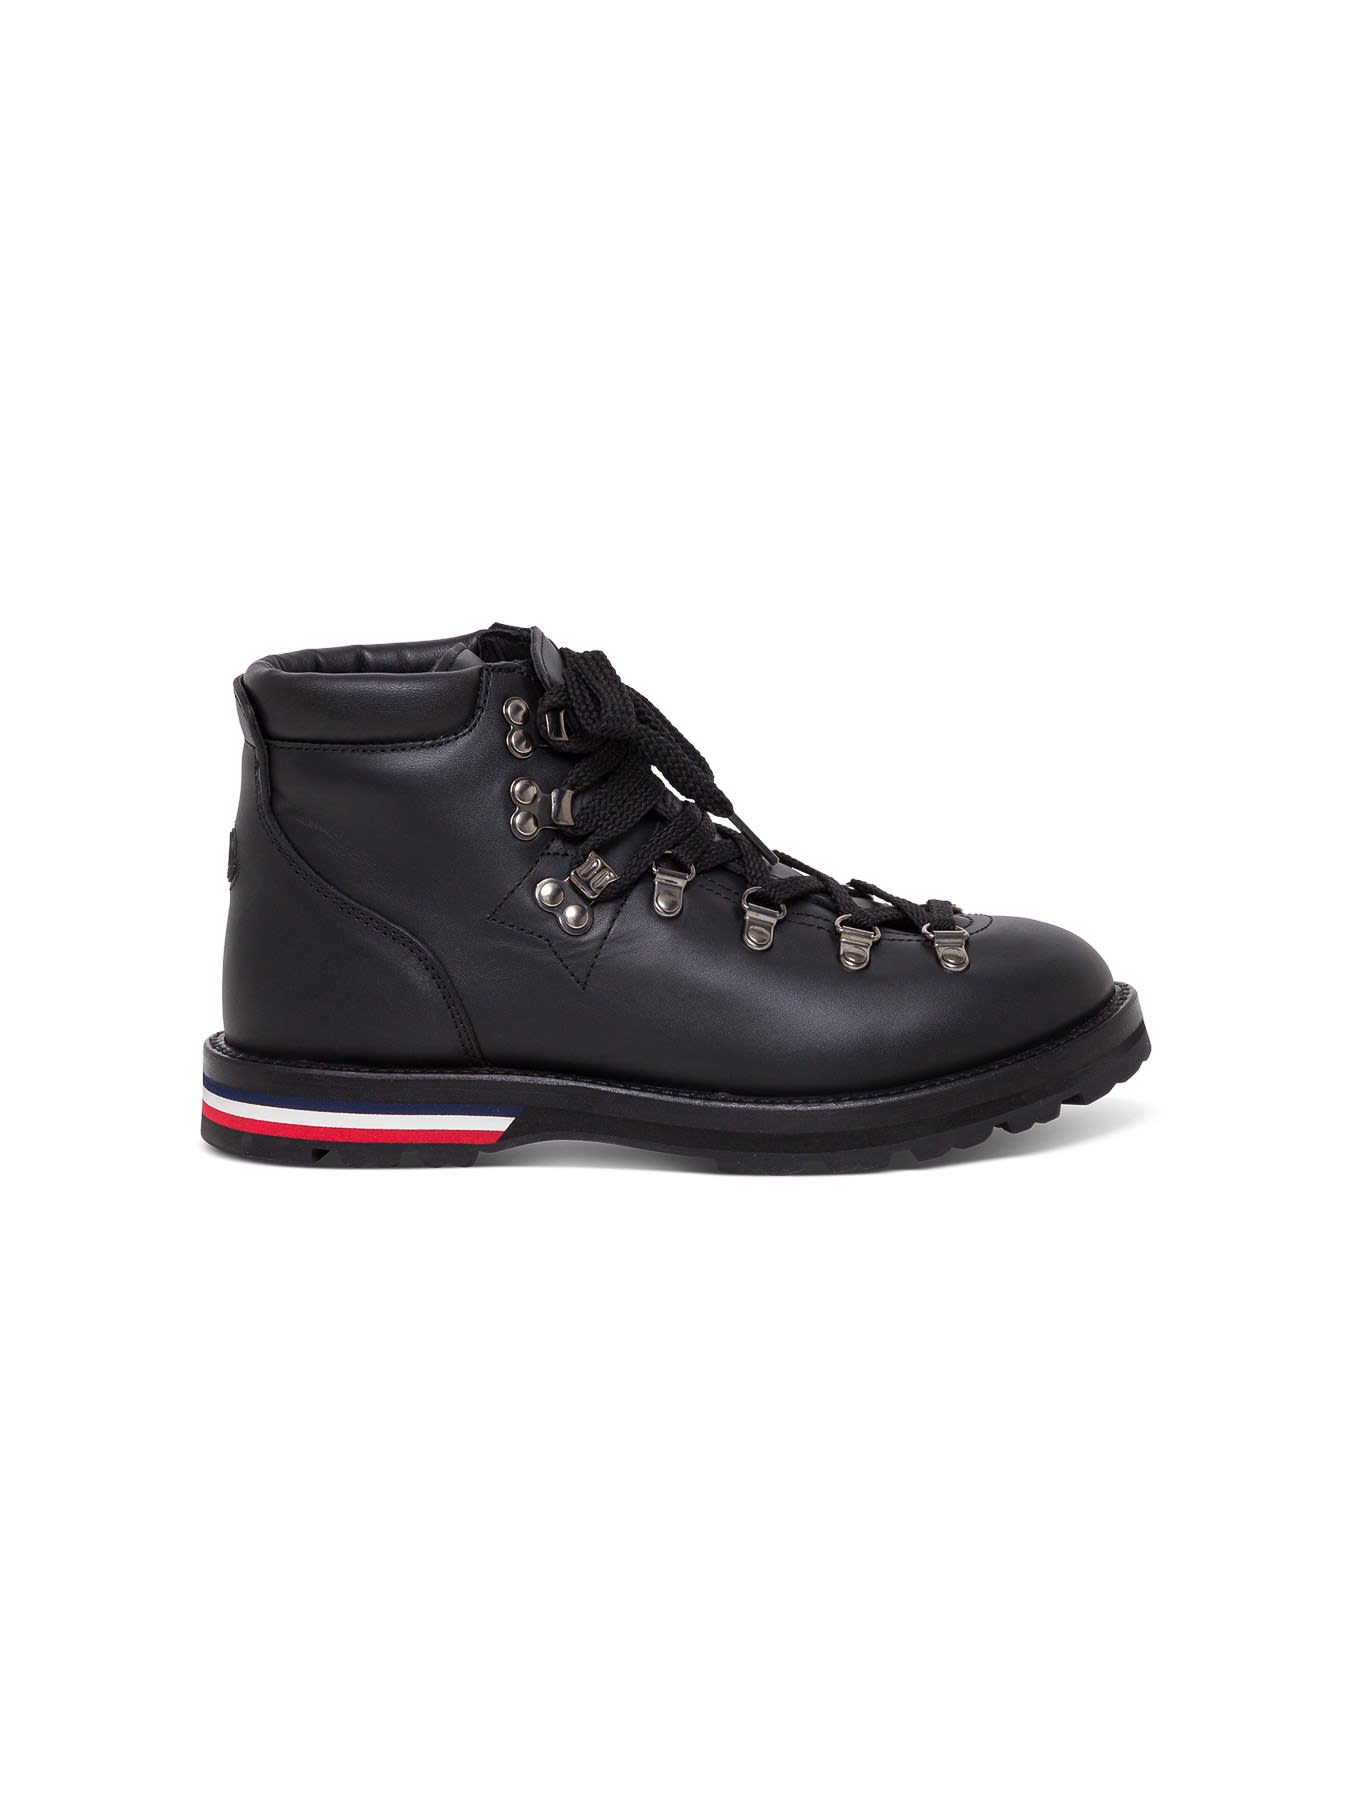 Buy Moncler Leather Ankle Boots With Tricolor Sole online, shop Moncler shoes with free shipping